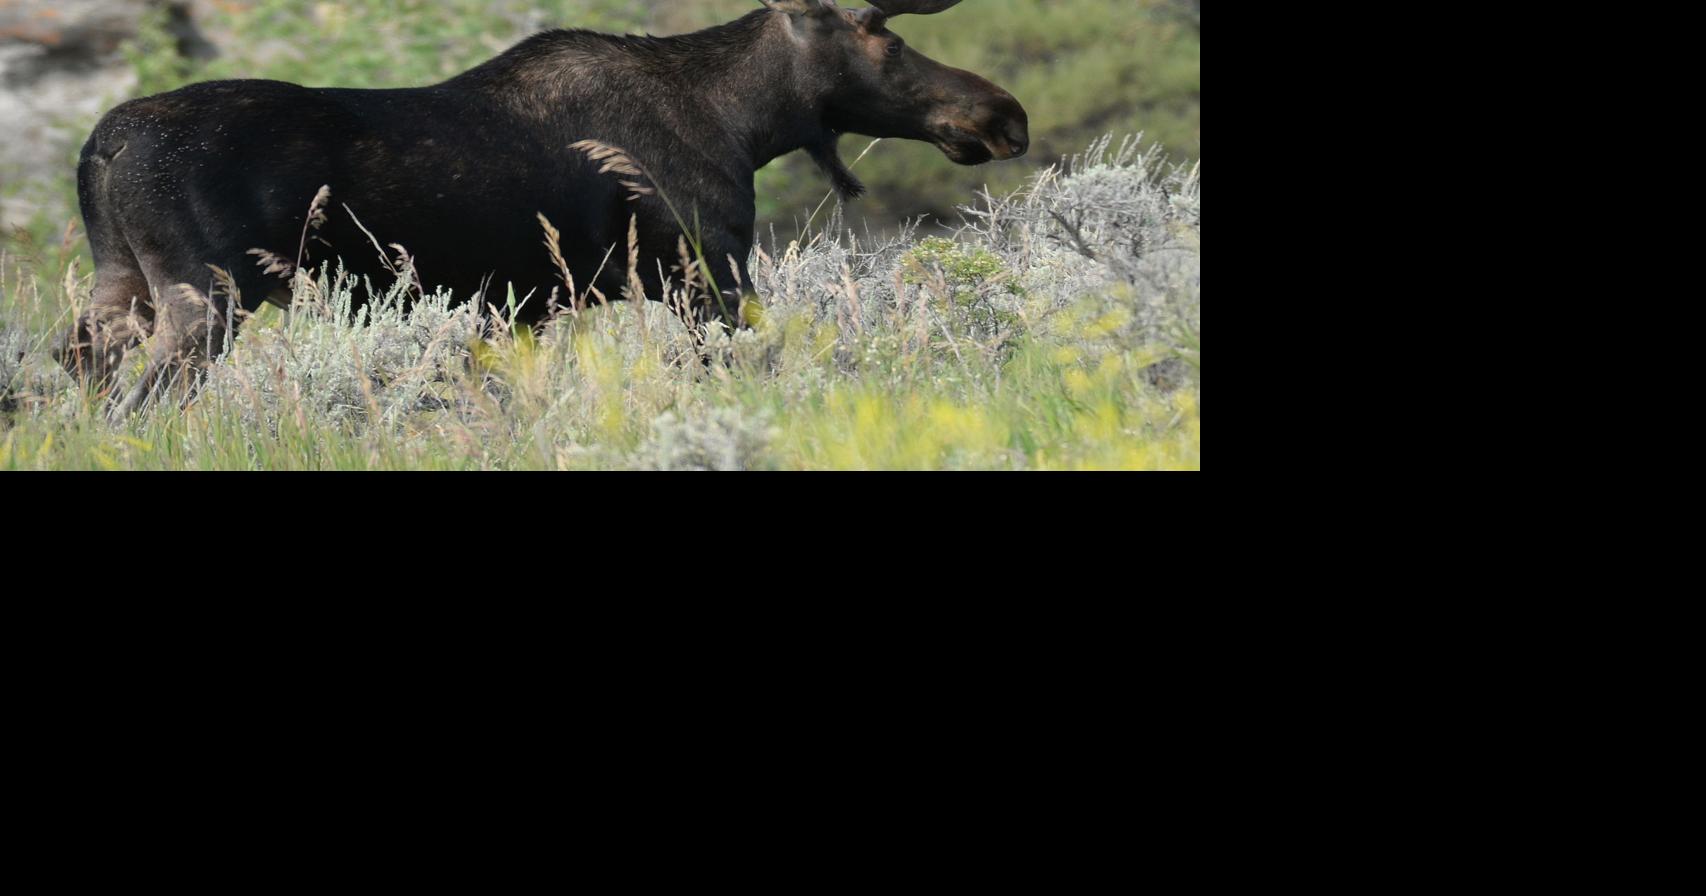 Pictures of a Moose  : Majestic Moose Sightings